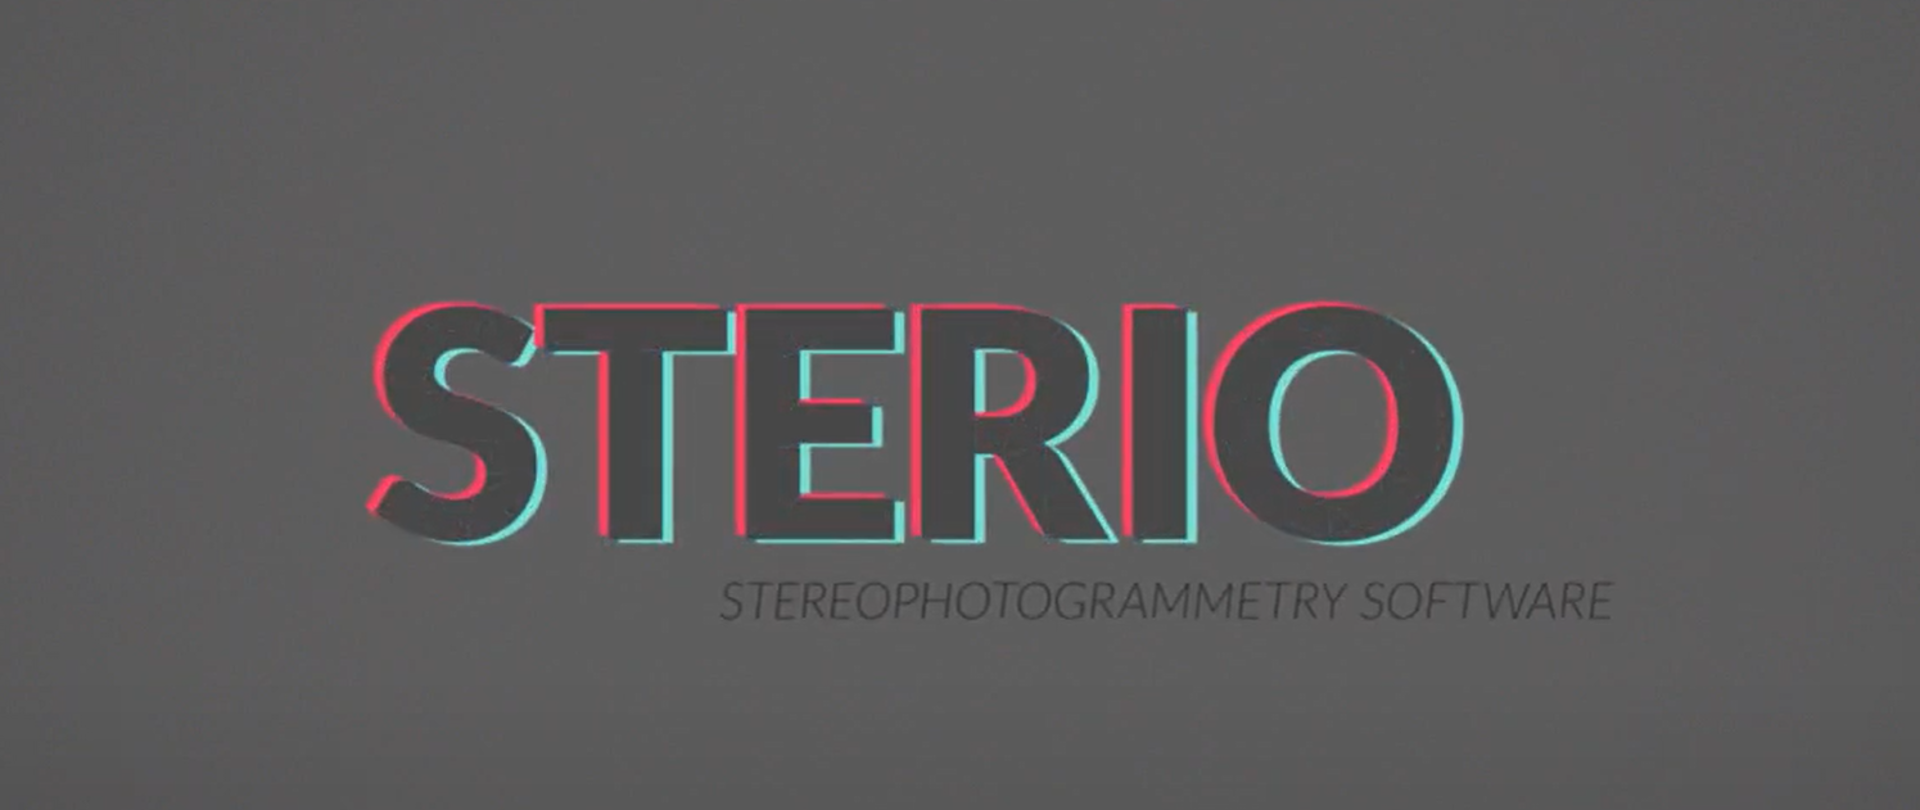 Sterio stereophotogrammetry software